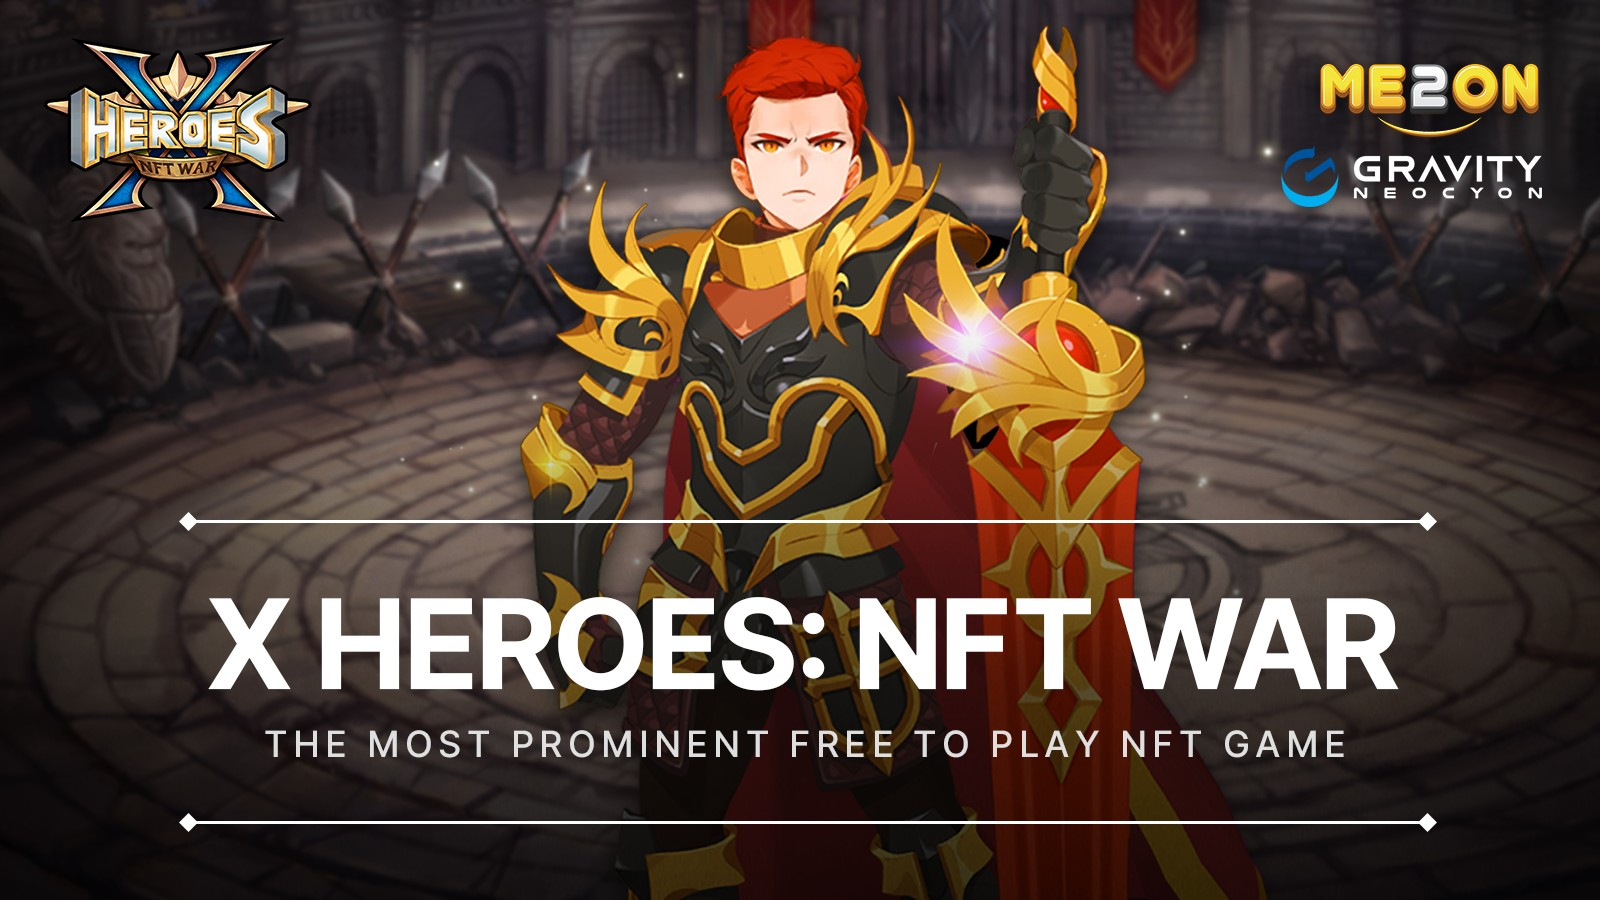 Gravity Neocyon Completed Official Global Launching of X Heroes: NFT War  with P2E System Applied